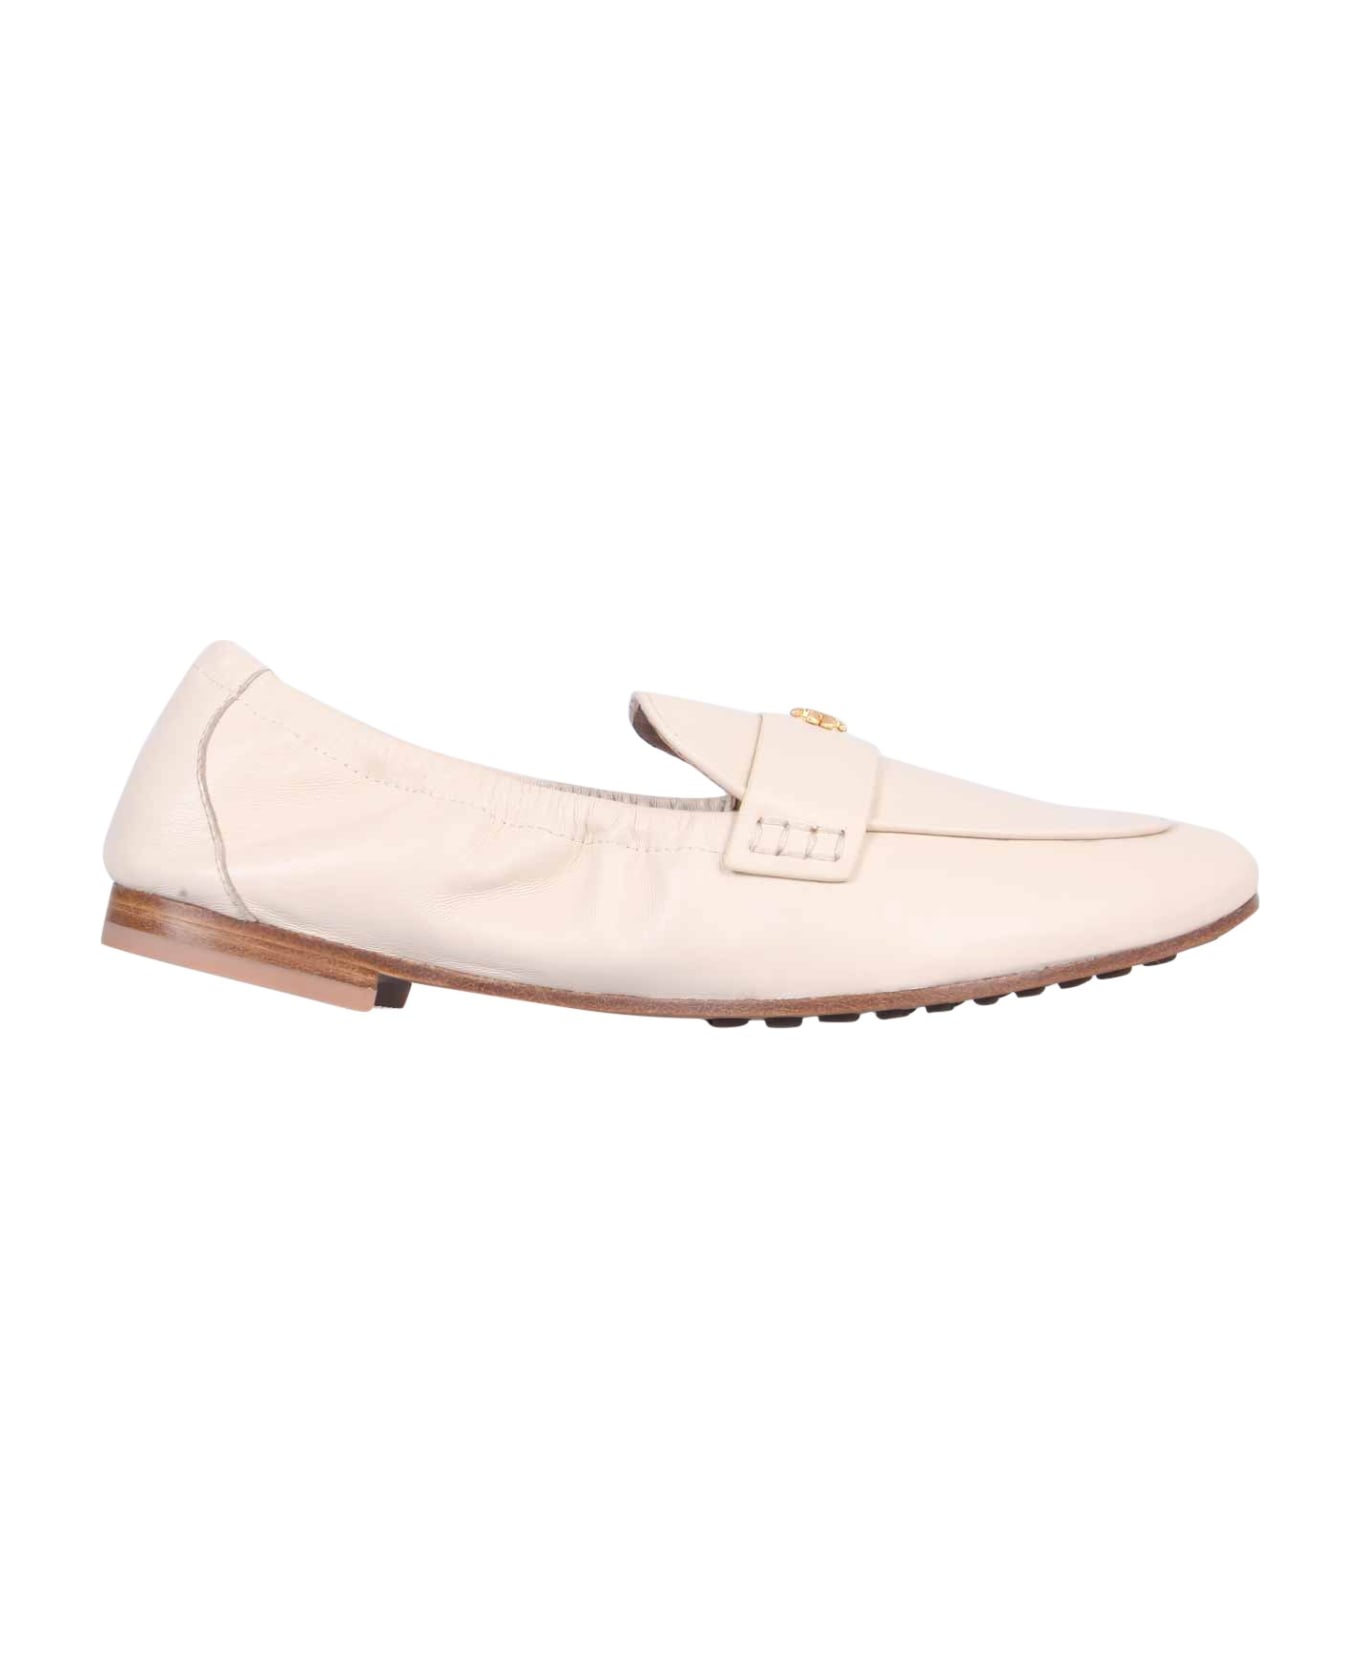 Tory Burch Leather Loafer - BEIGE